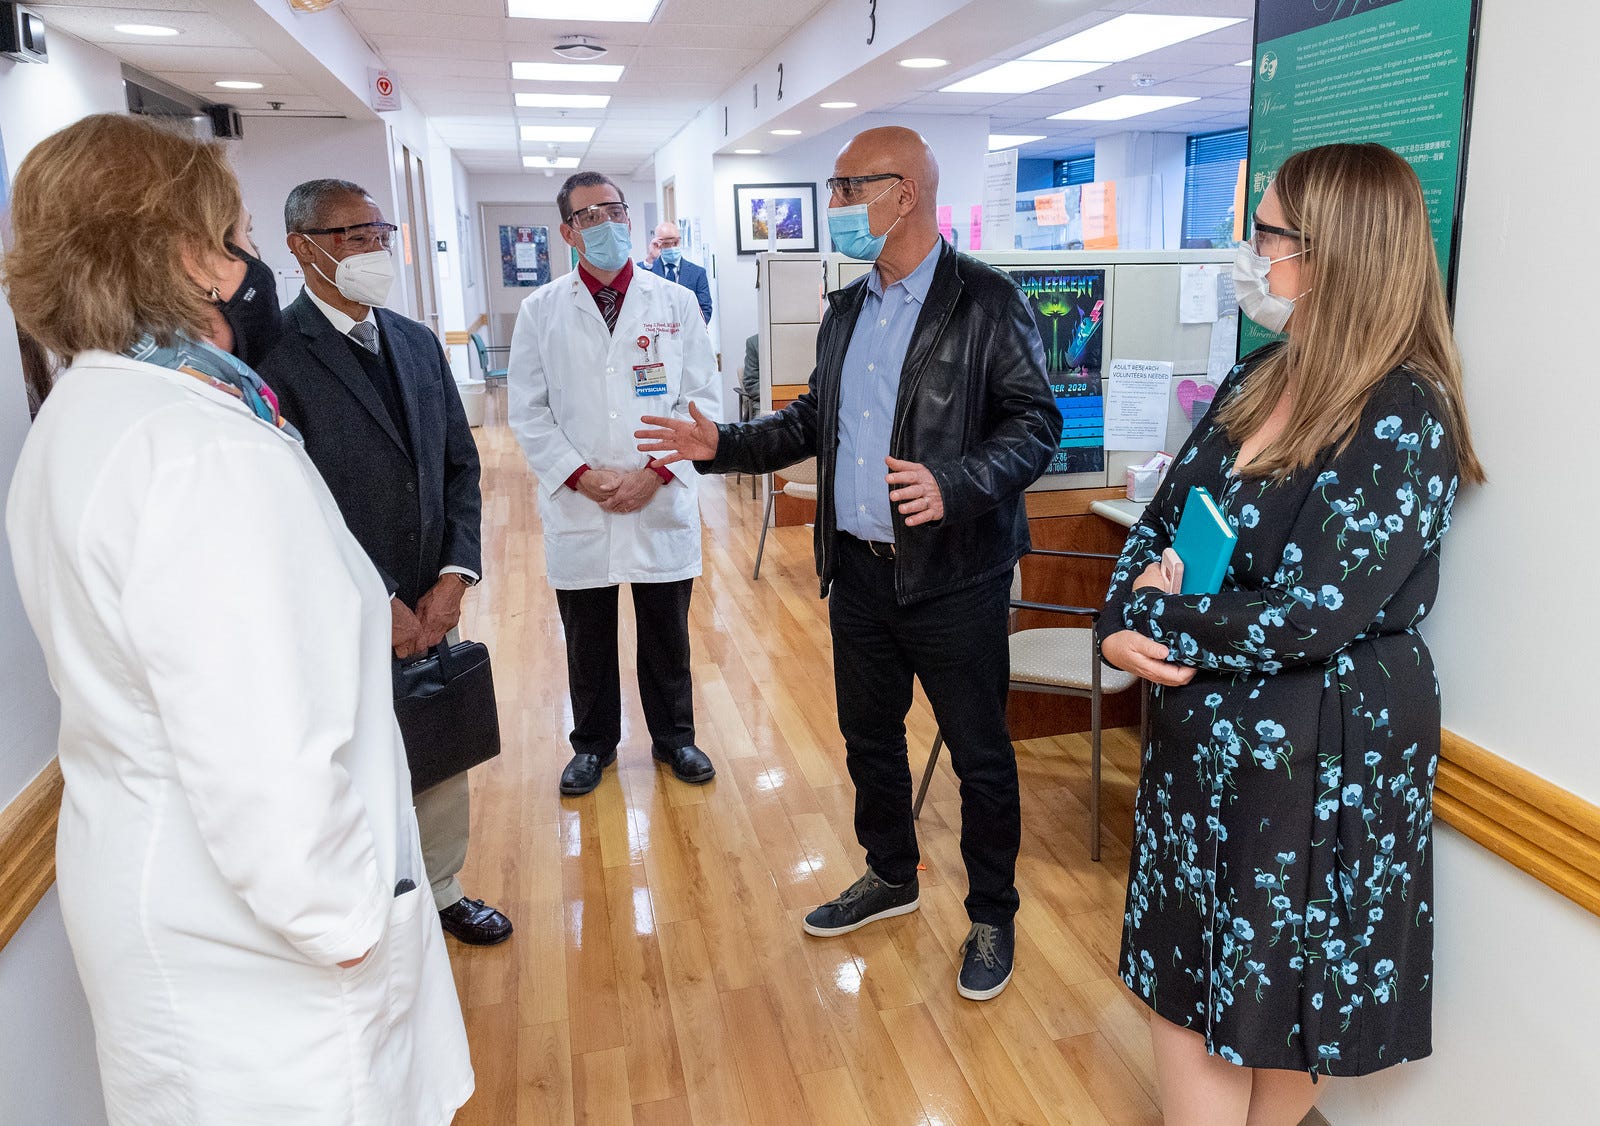 Moncef Slaoui, in leather jacket, tours Temple University Hospital on Nov. 20. Getting a diverse group of clinical trial participants has been  part of his work helping to lead the U.S. COVID-19 vaccine effort.